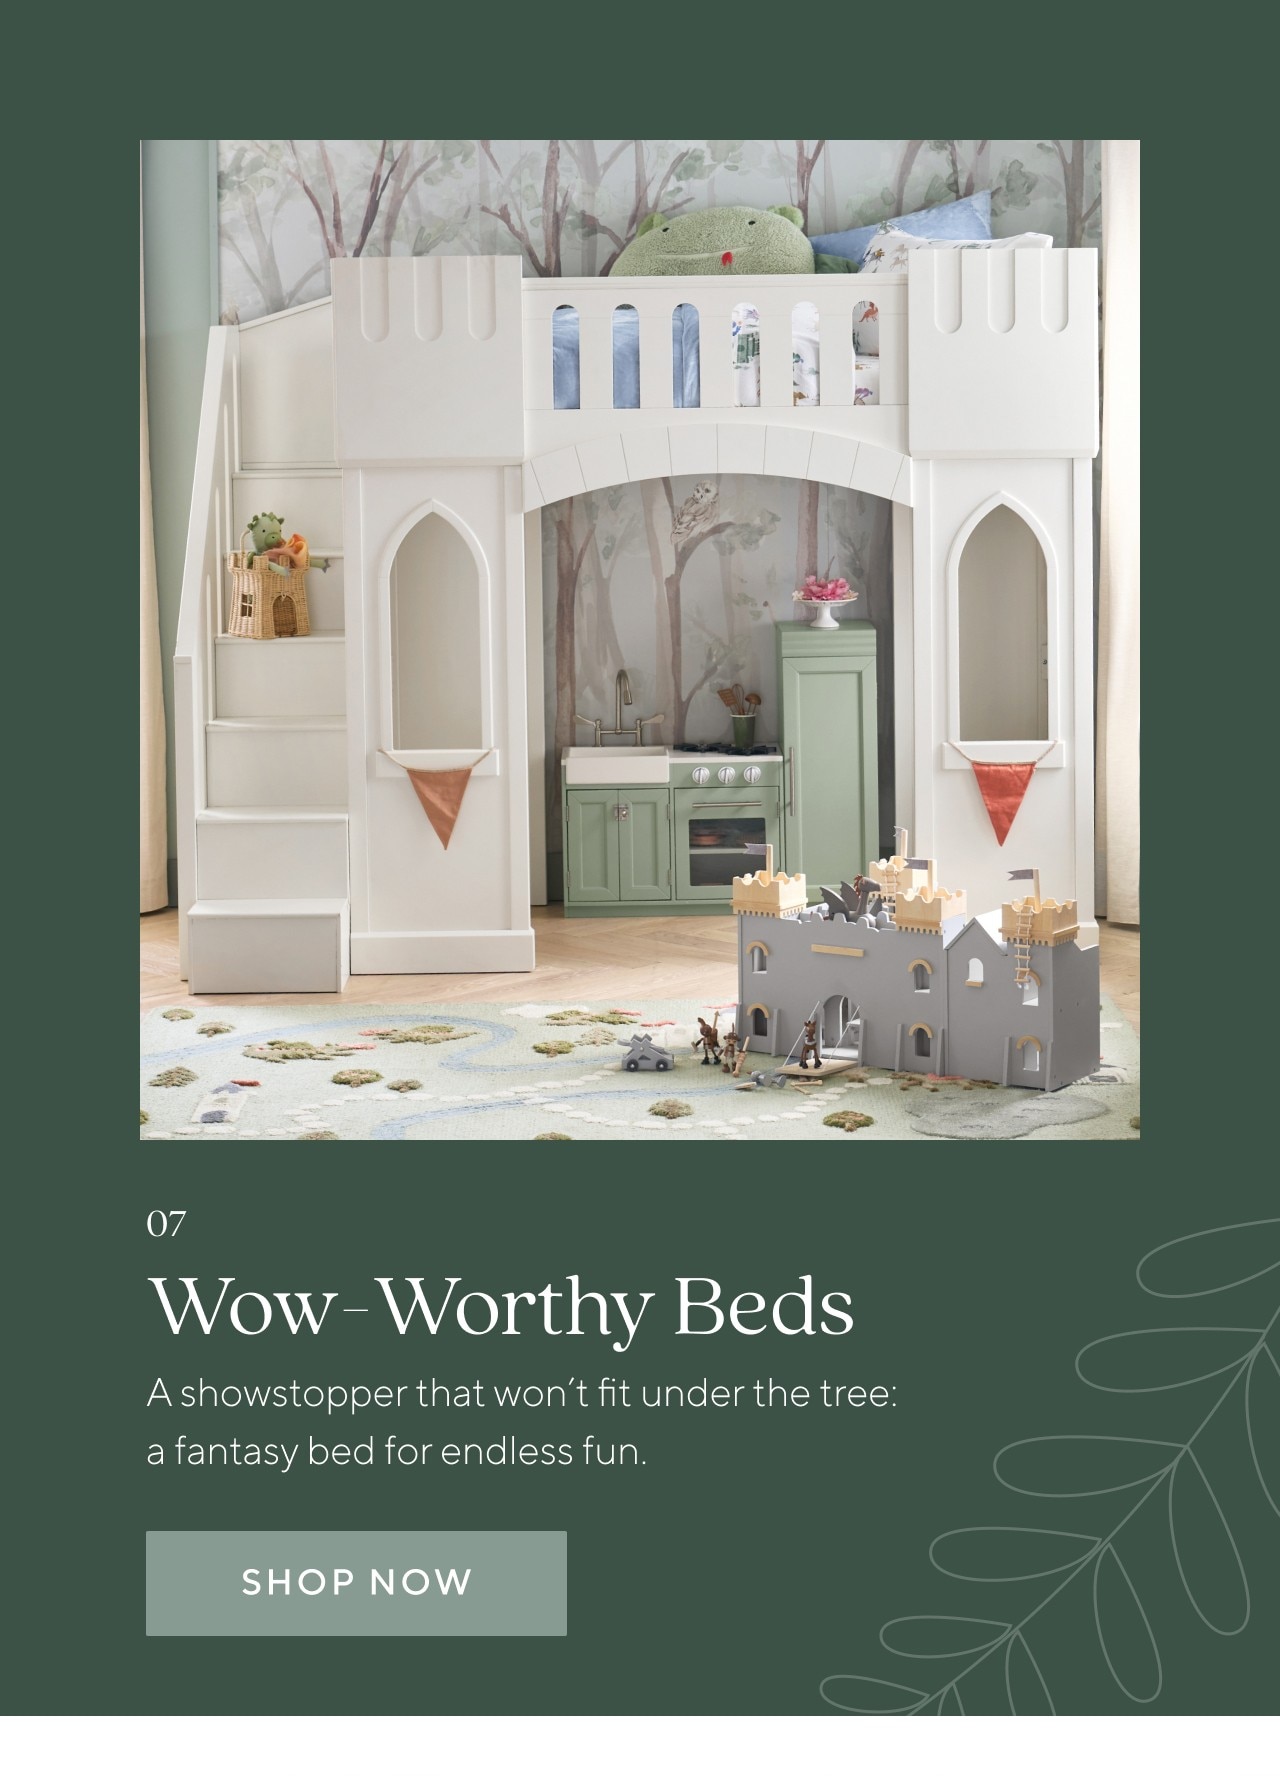 WOW-WORTHY BEDS